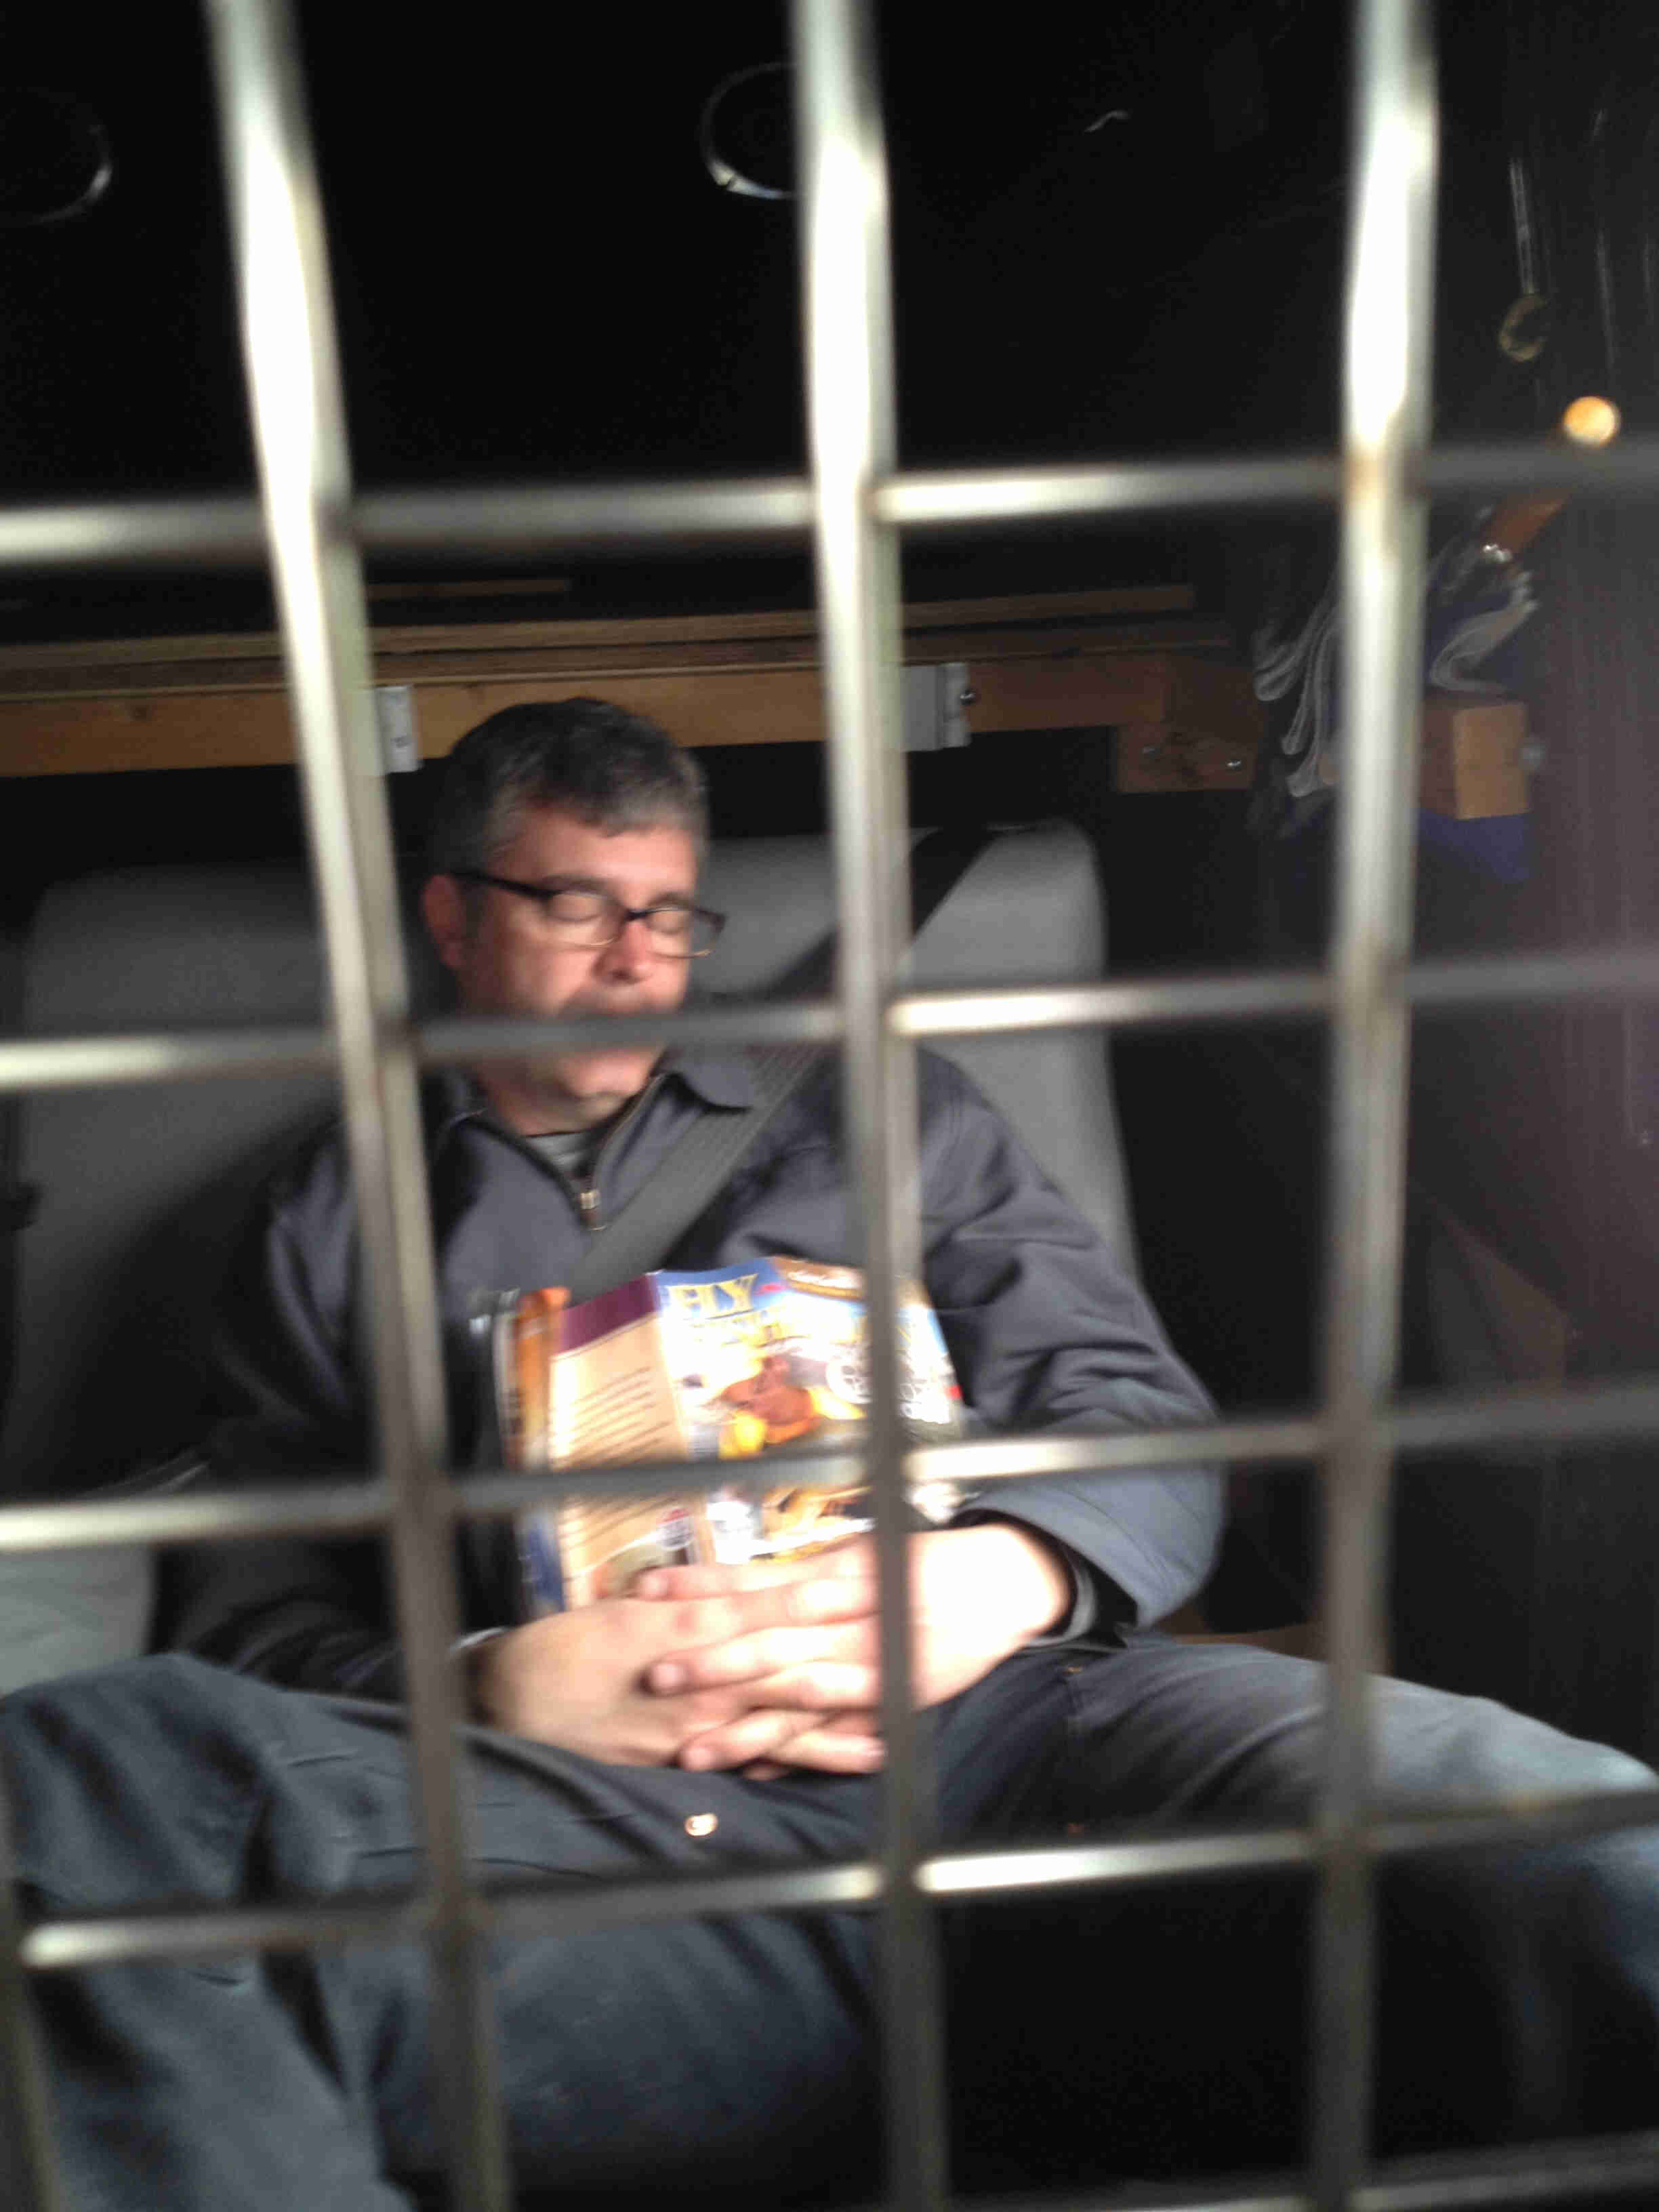 Front view of a person sleeping with a book on their chest, behind a grid of steel bars